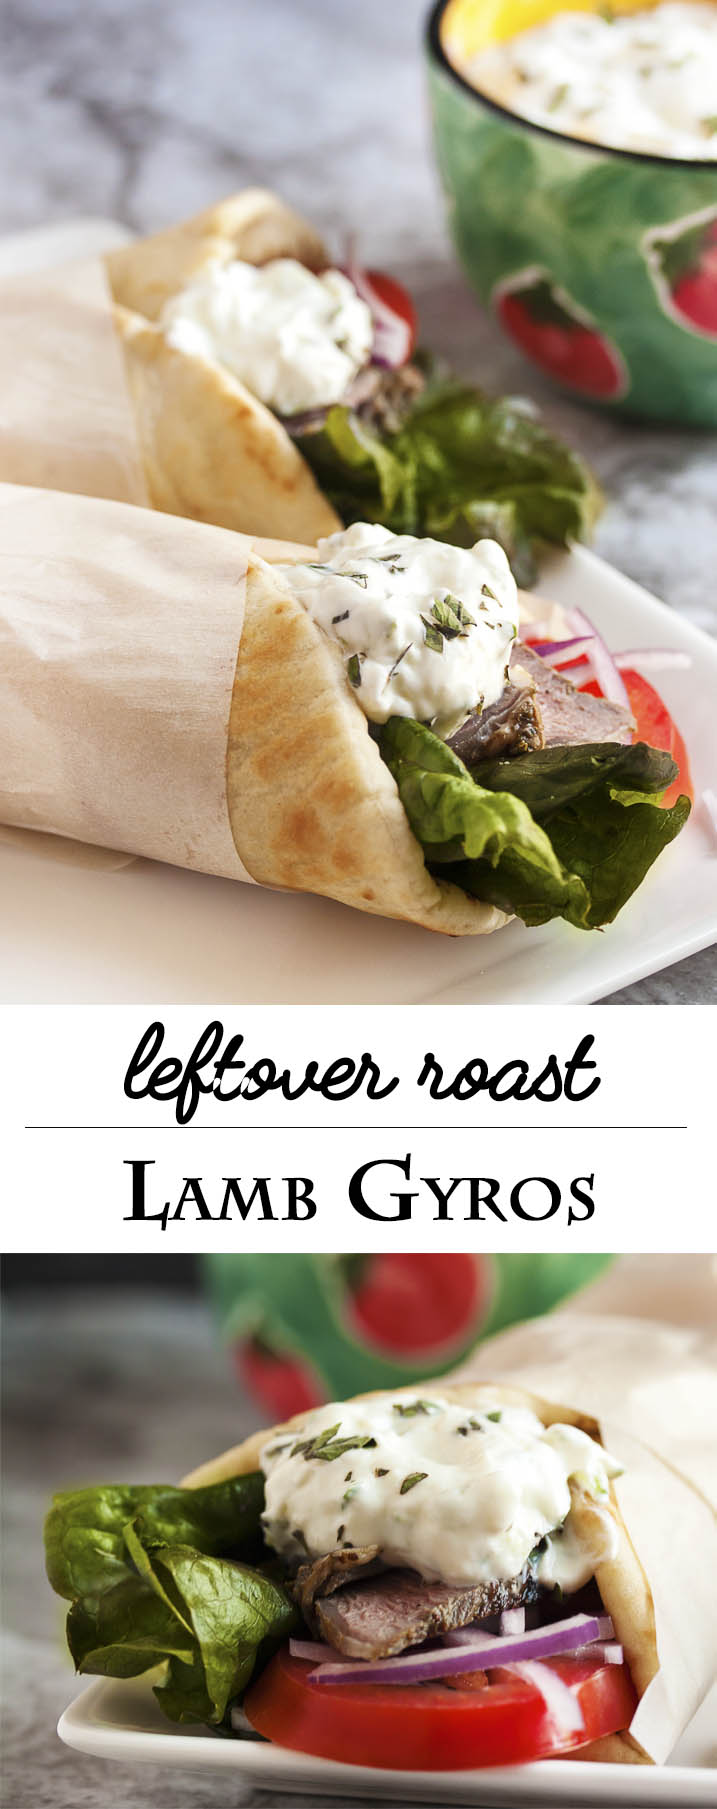 Leftover Lamb Gyros with Tzatziki Sauce - What to do with leftover lamb roast? Make these incredibly yummy lamb gyros and top them with a 5 minute tzatziki sauce. | justalittlebitofbacon.com